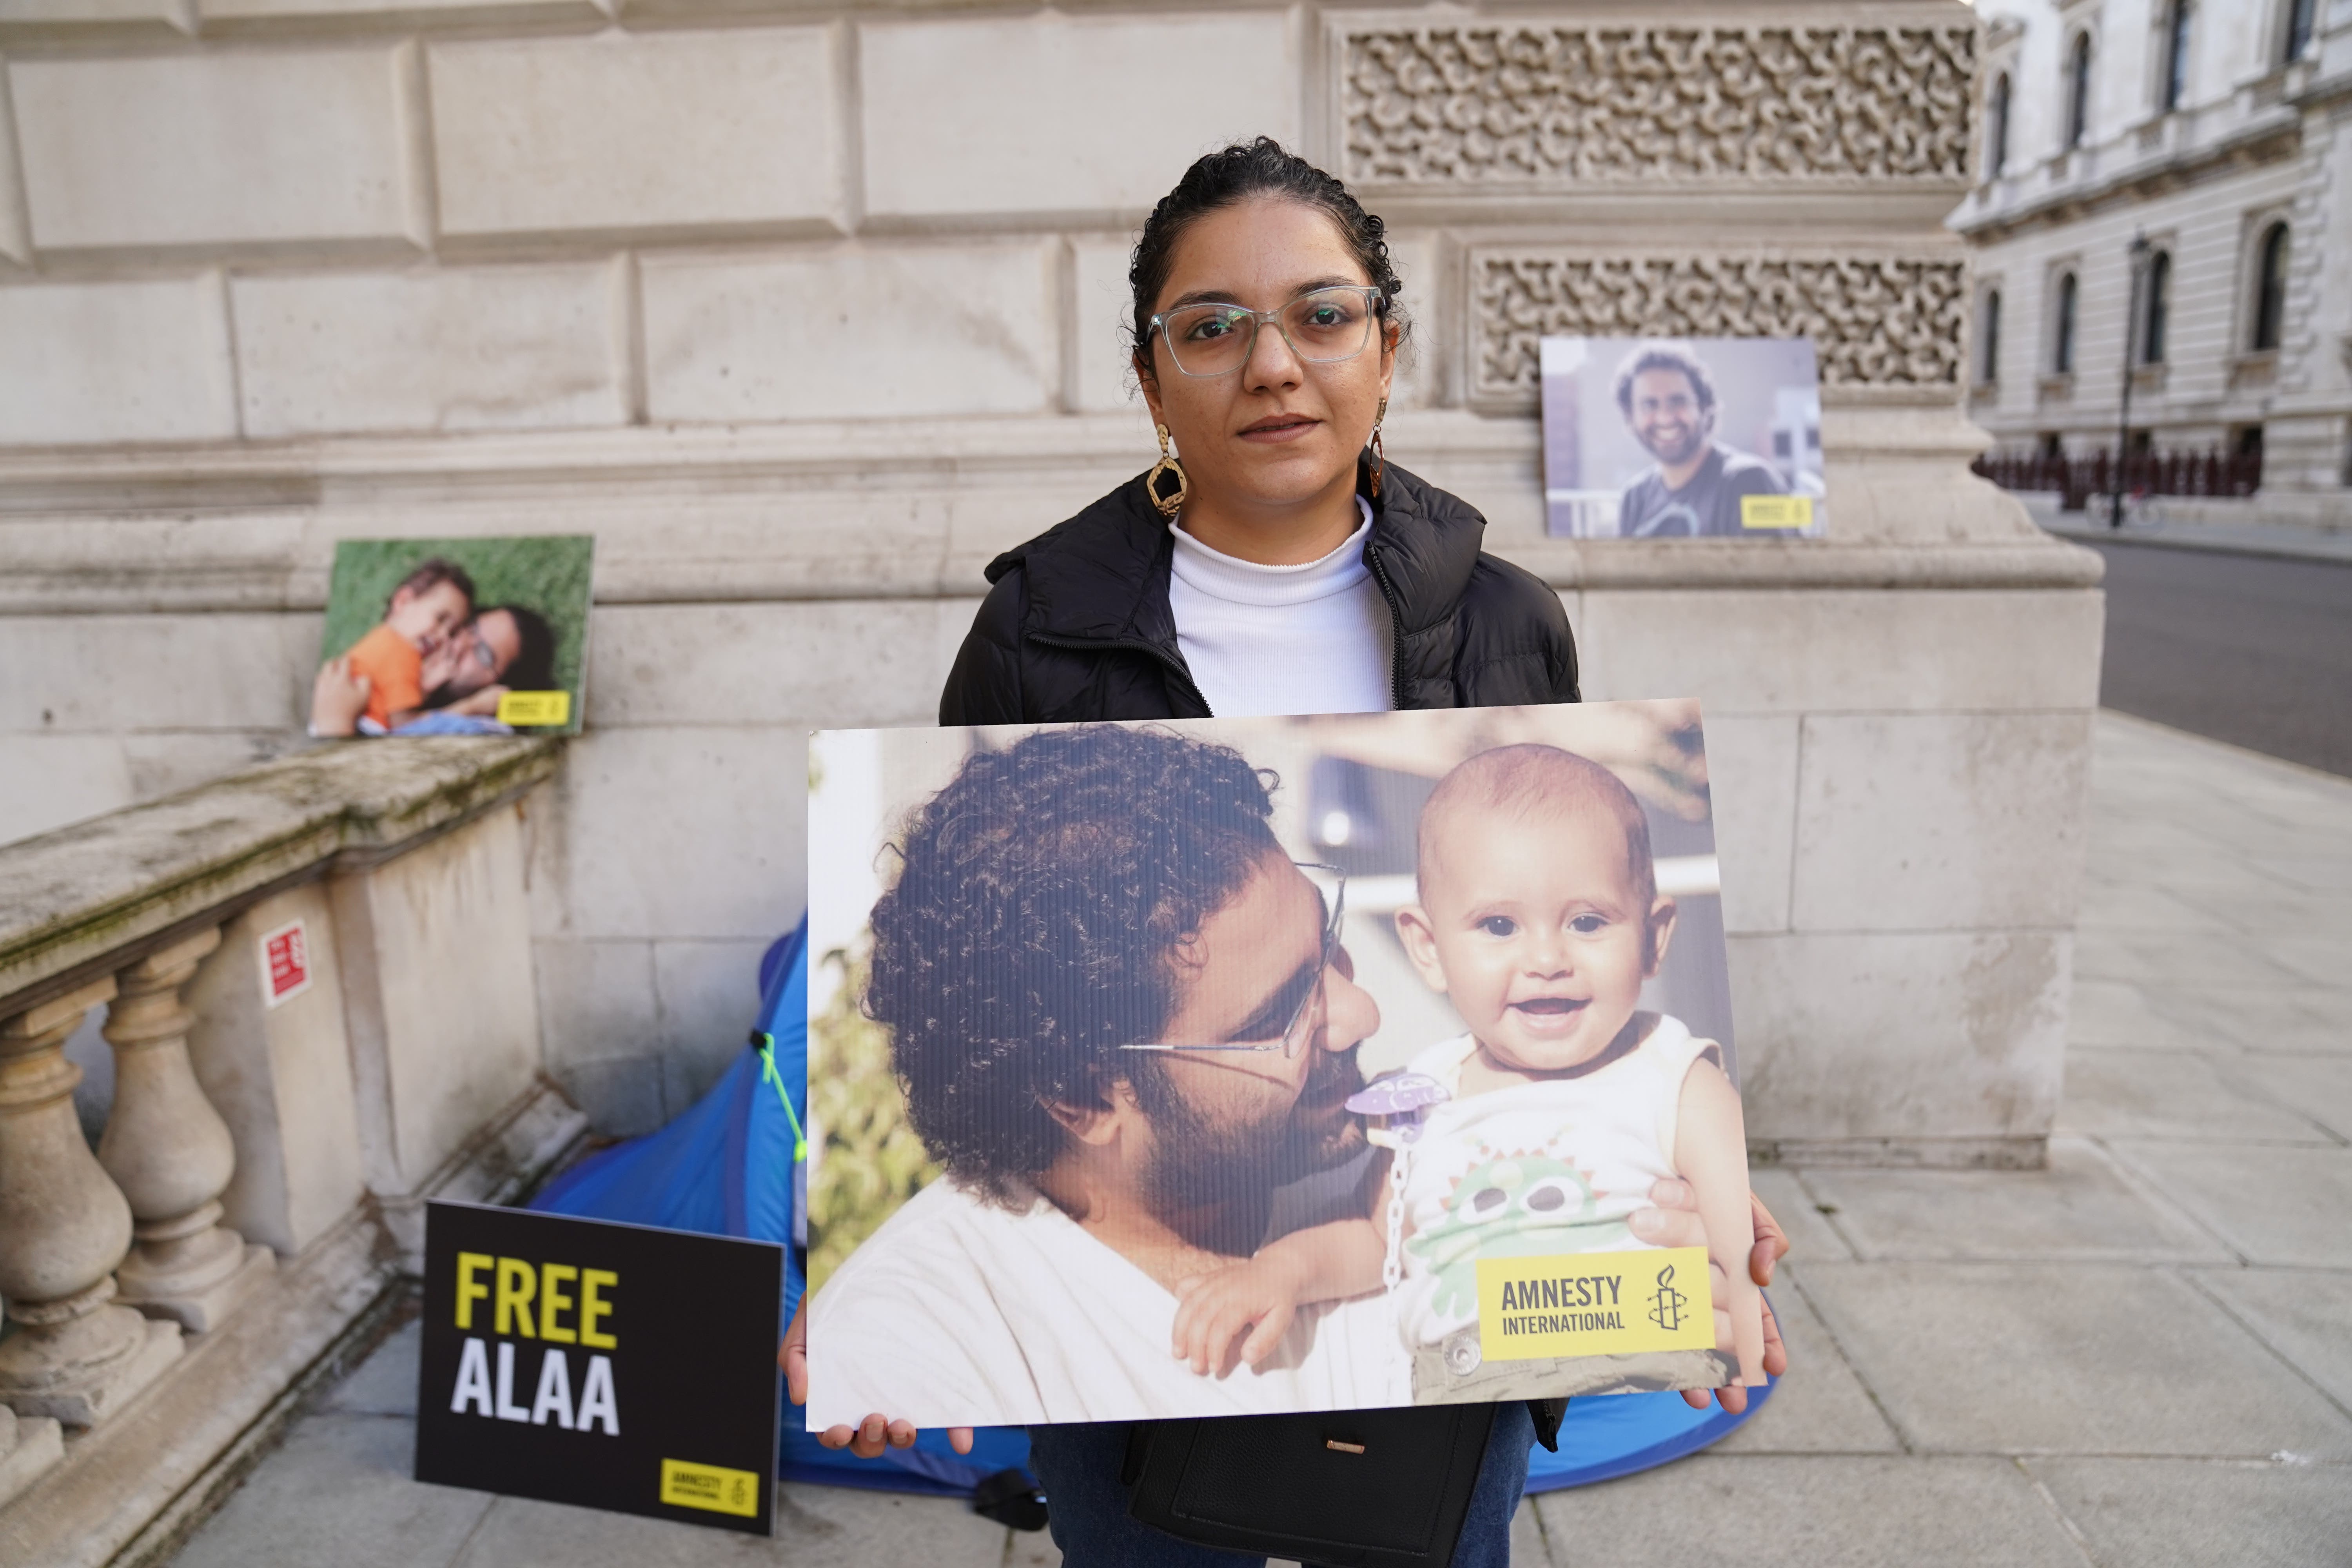 Sanaa Seif, the sister of writer Alaa Abd el-Fattah, a British-Egyptian activist imprisoned in Egypt, on a hunger strike outside the Foreign Office in October